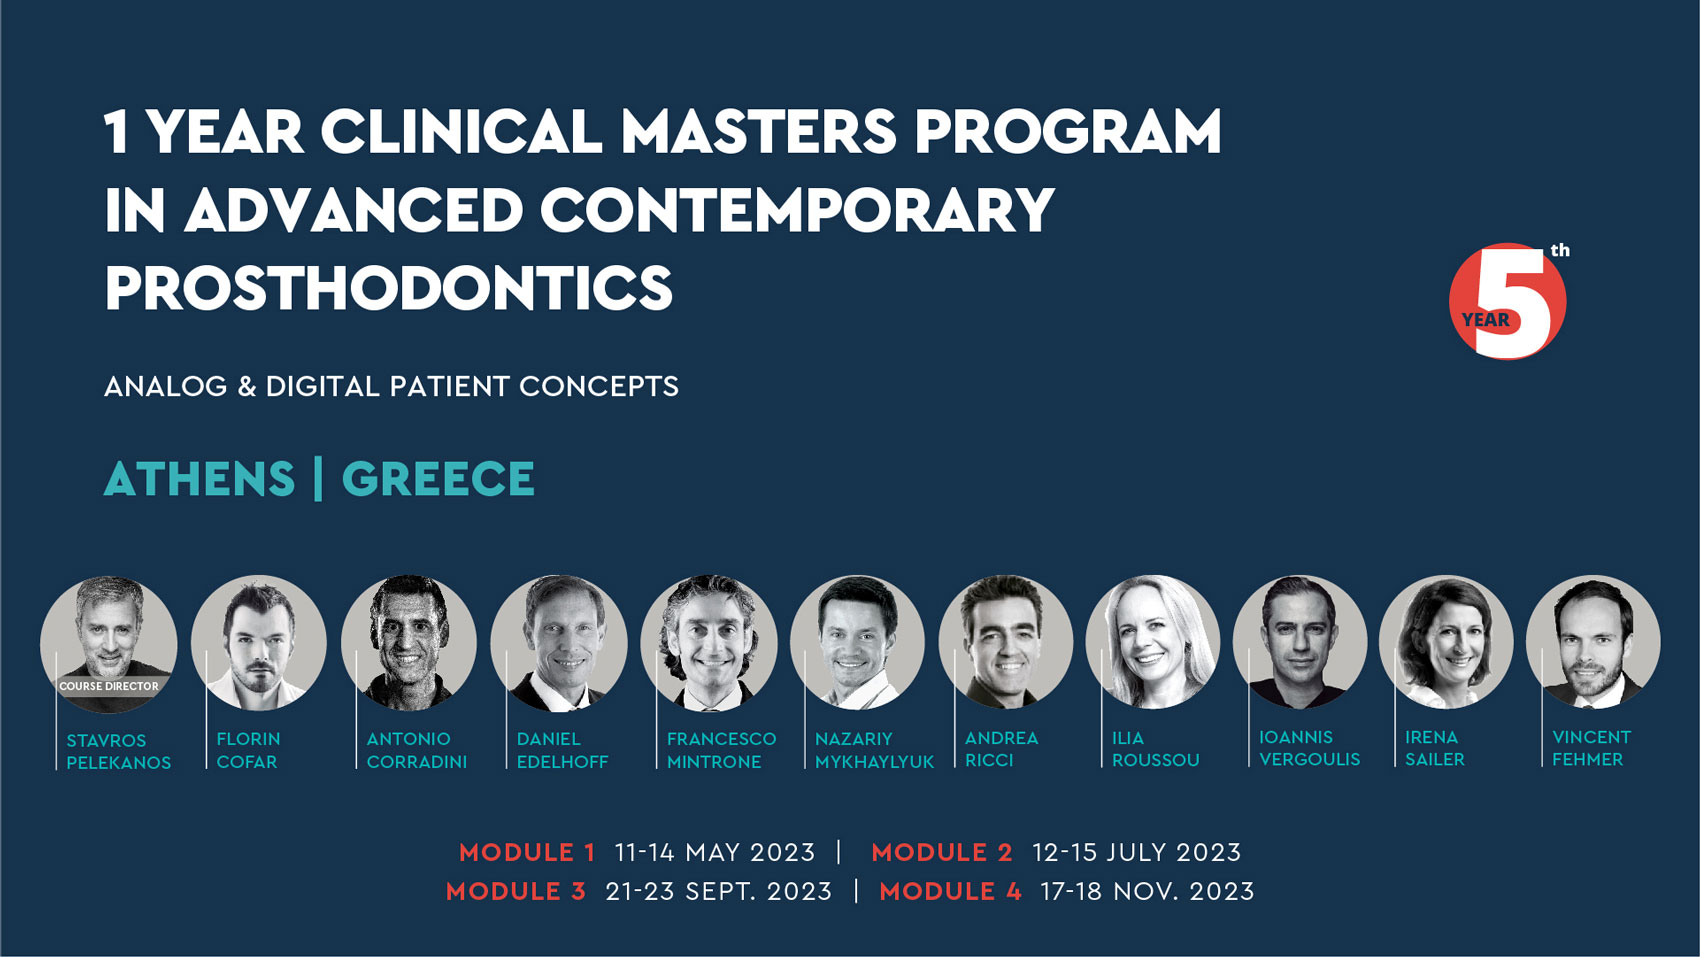 1 YEAR CLINICAL MASTERS PROGRAM IN ADVANCED CONTEMPORARY PROSTHODONTICS (2023)